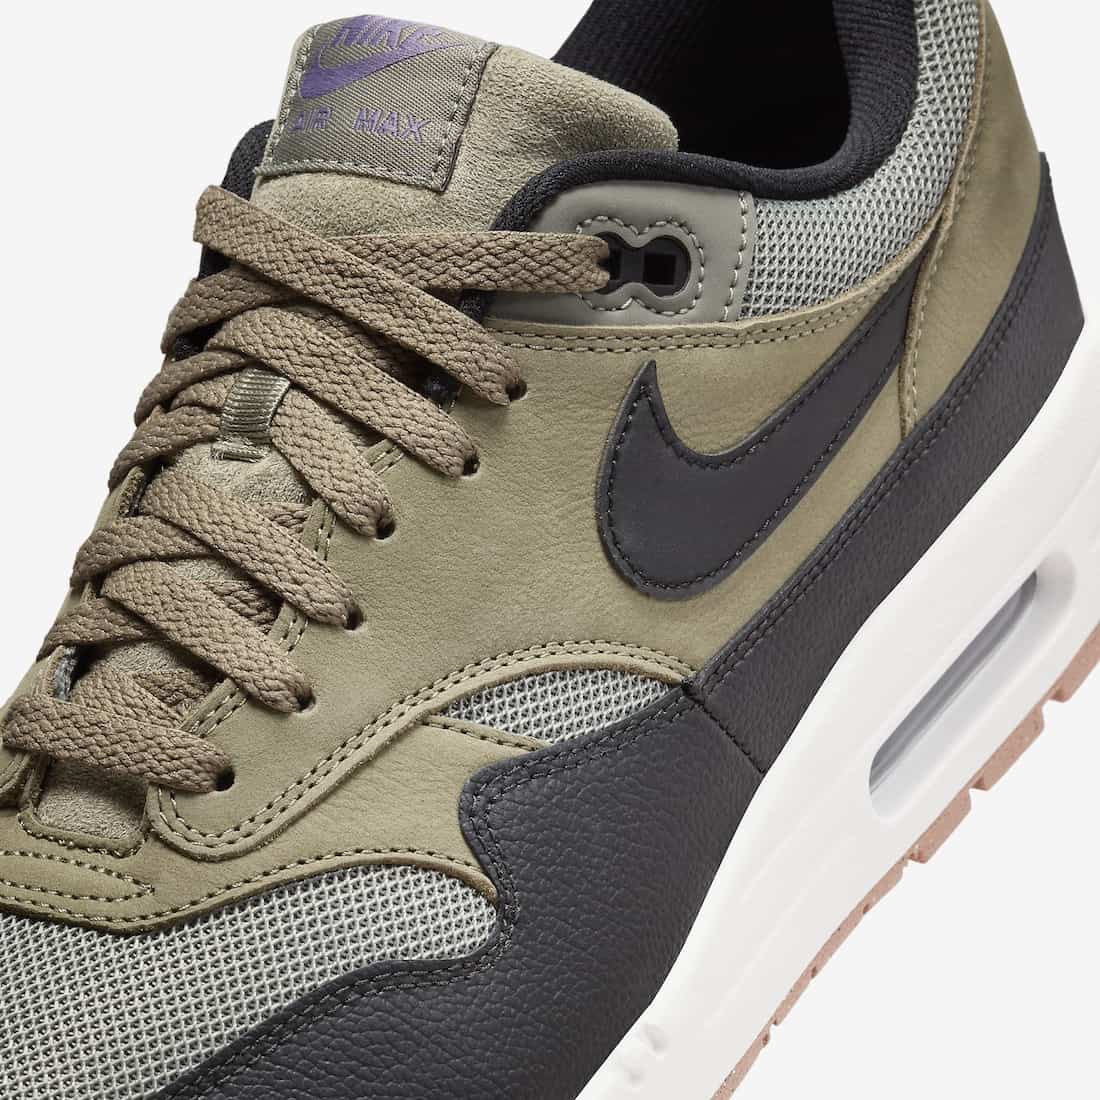 Air Max 1 Neutral Olive and Black"